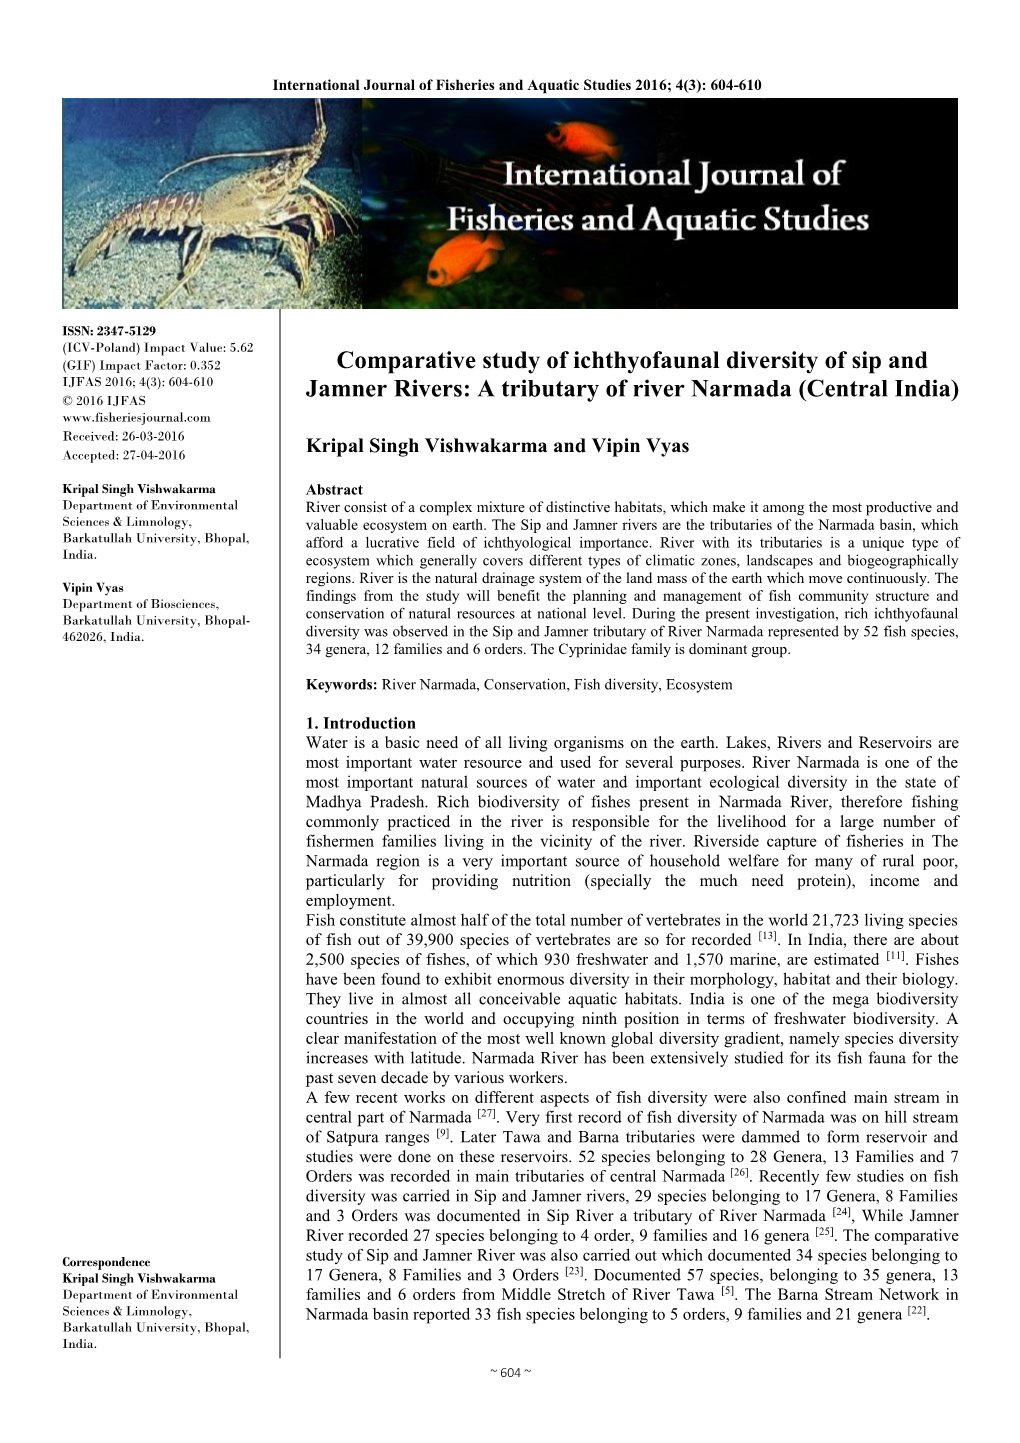 Comparative Study of Ichthyofaunal Diversity of Sip and Jamner Rivers